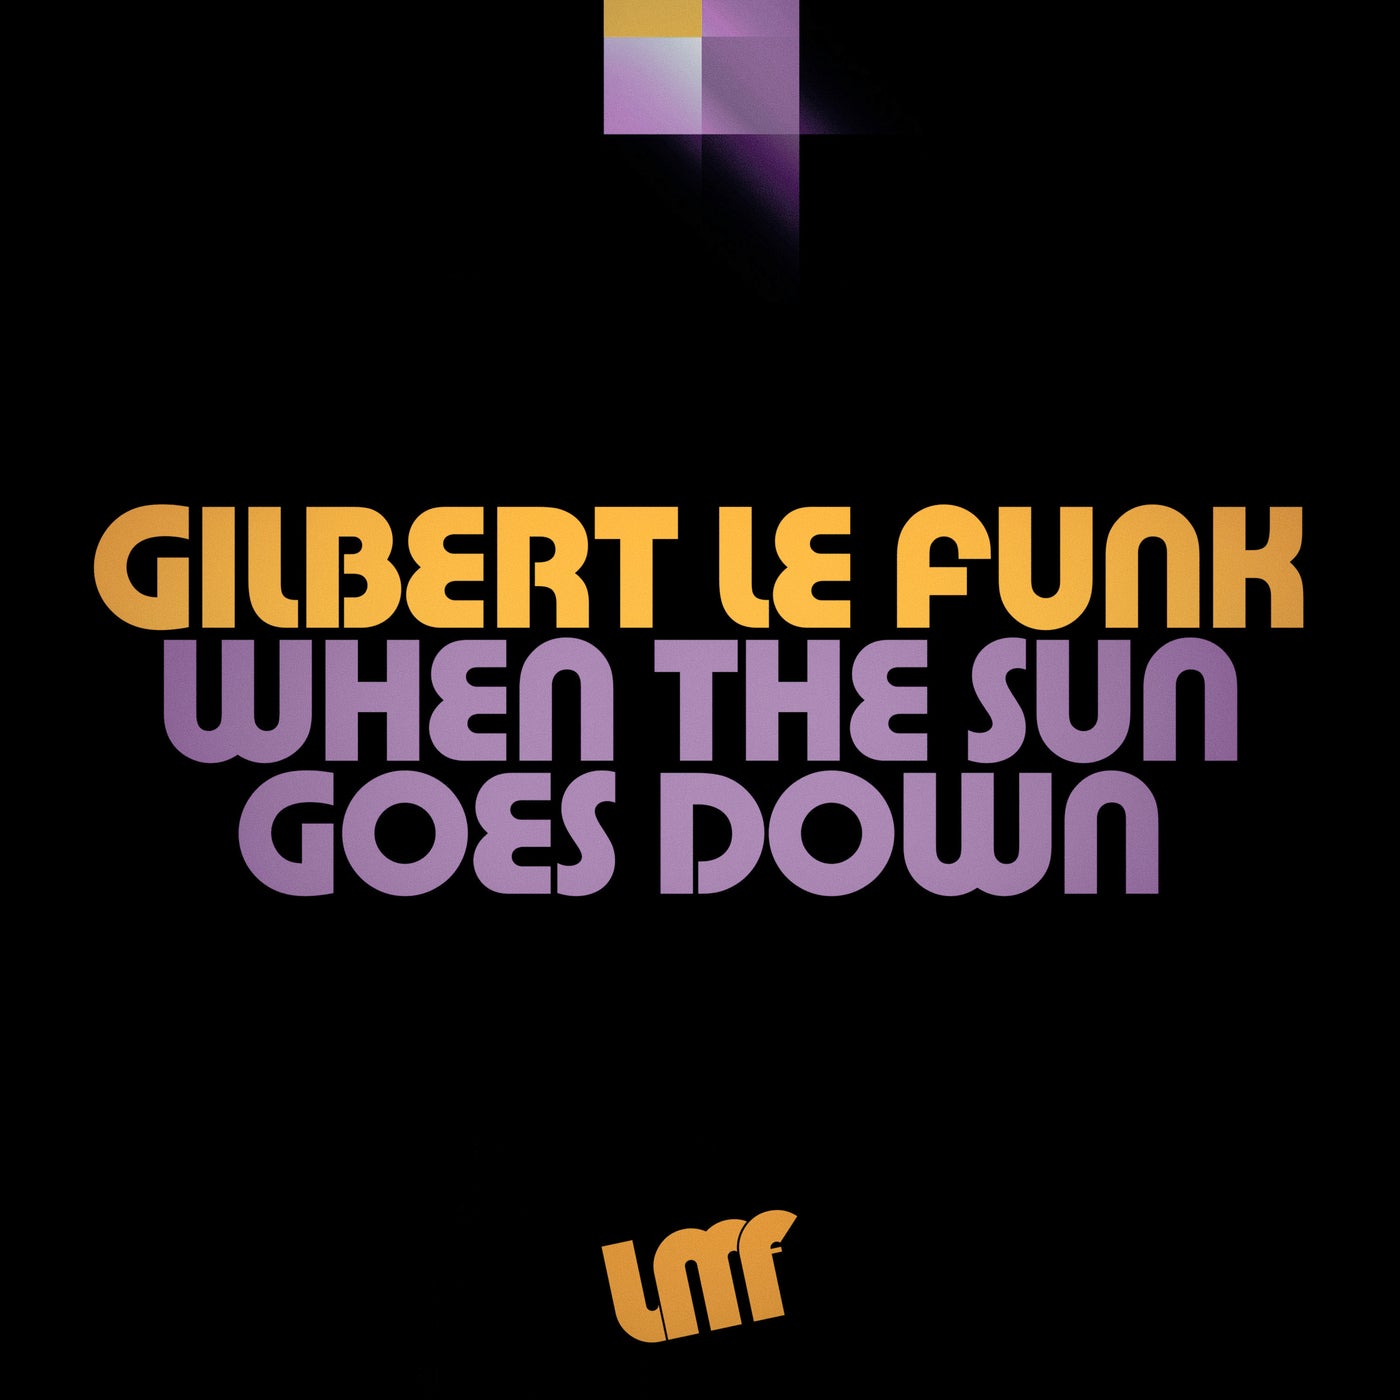 Gilbert Le Funk - When the Sun Goes Down [LMF0116]